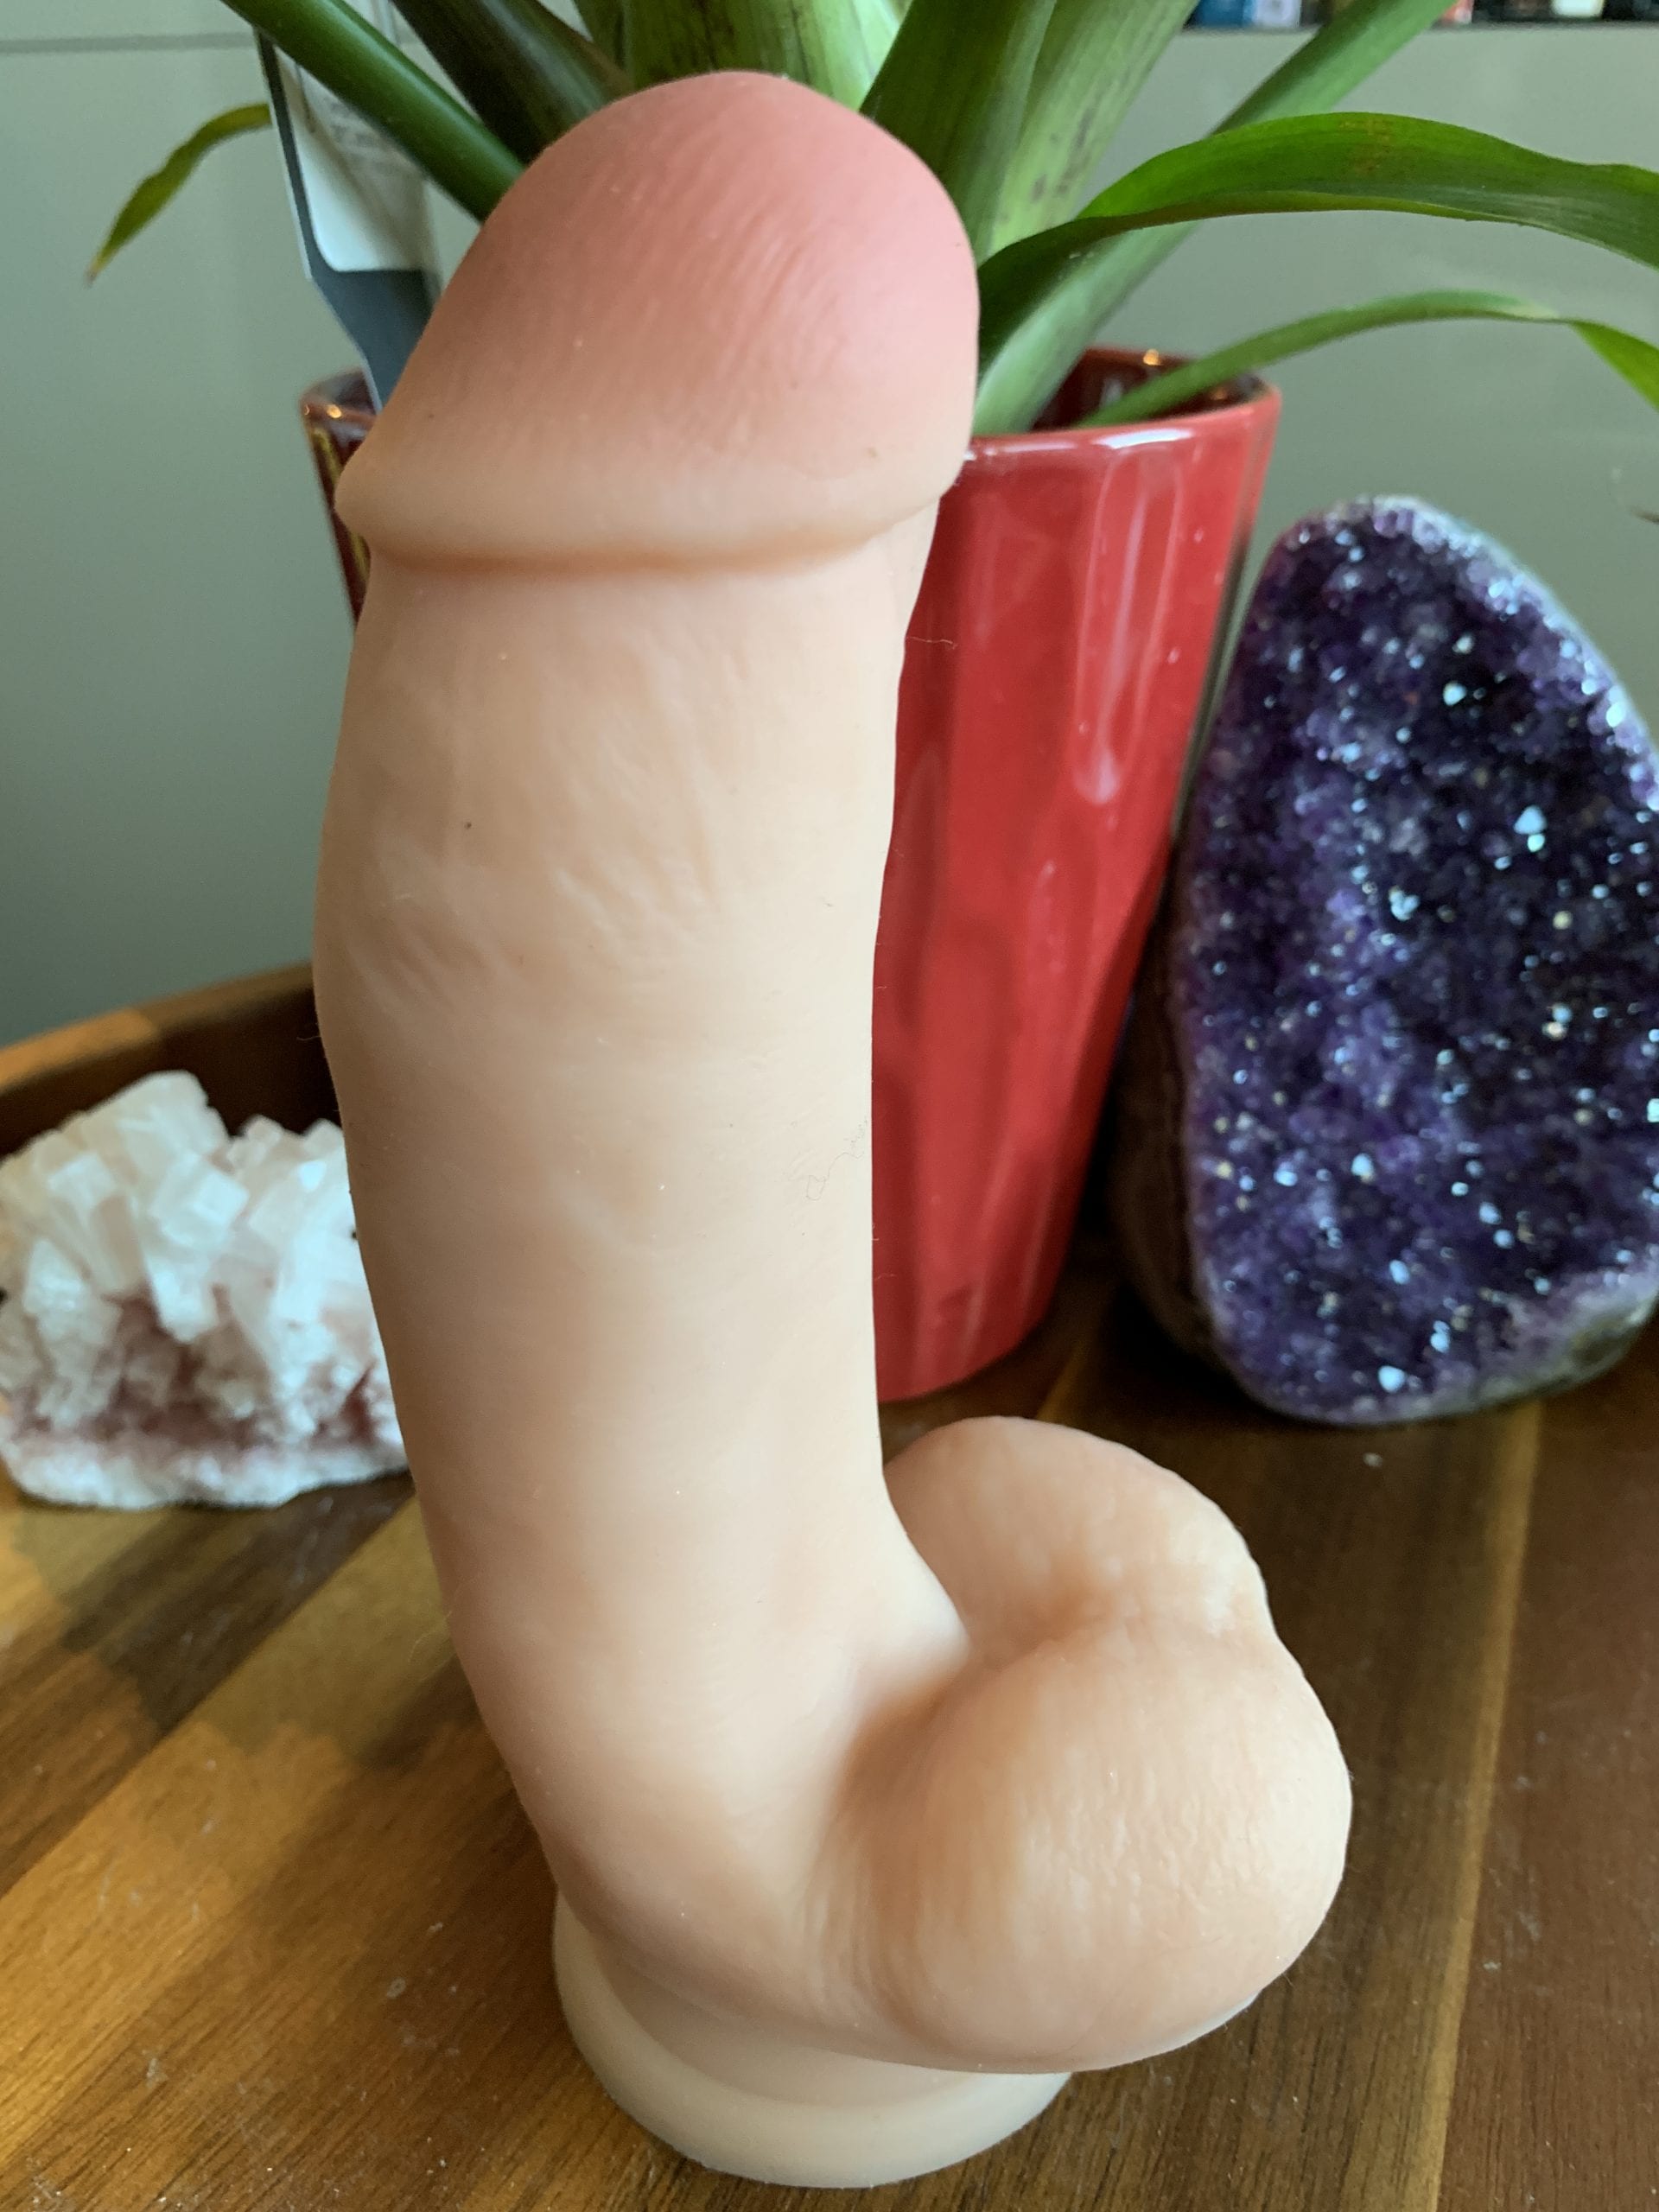 REVIEW: Silicone Willy’s 7 Inch Realistic Suction Cup Dildo with Balls